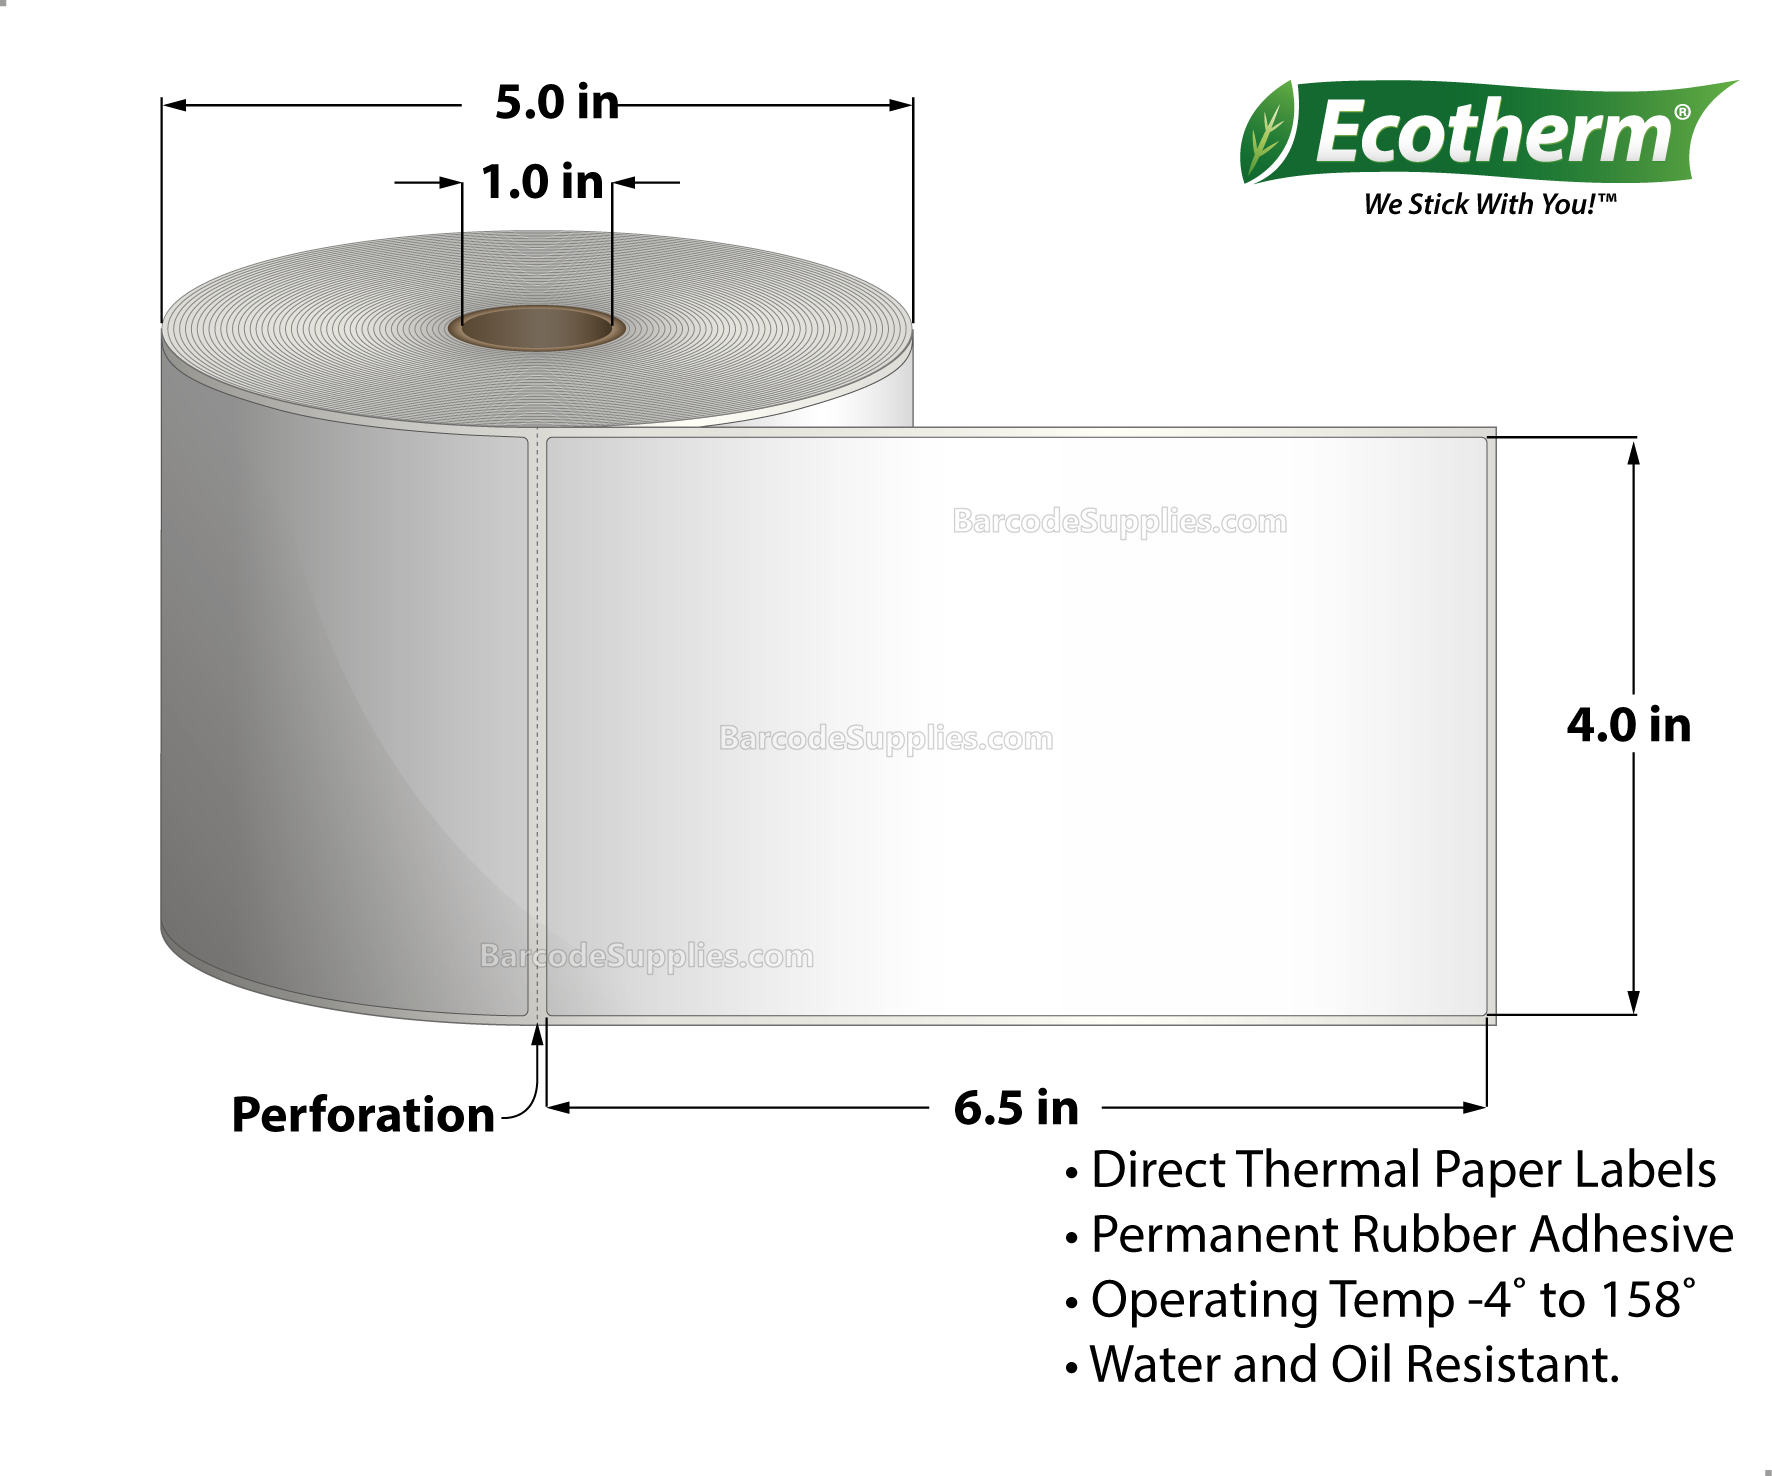 4 x 6.5 Direct Thermal White Labels With Rubber Adhesive - Perforated - 380 Labels Per Roll - Carton Of 6 Rolls - 2280 Labels Total - MPN: ECOTHERM15156-6